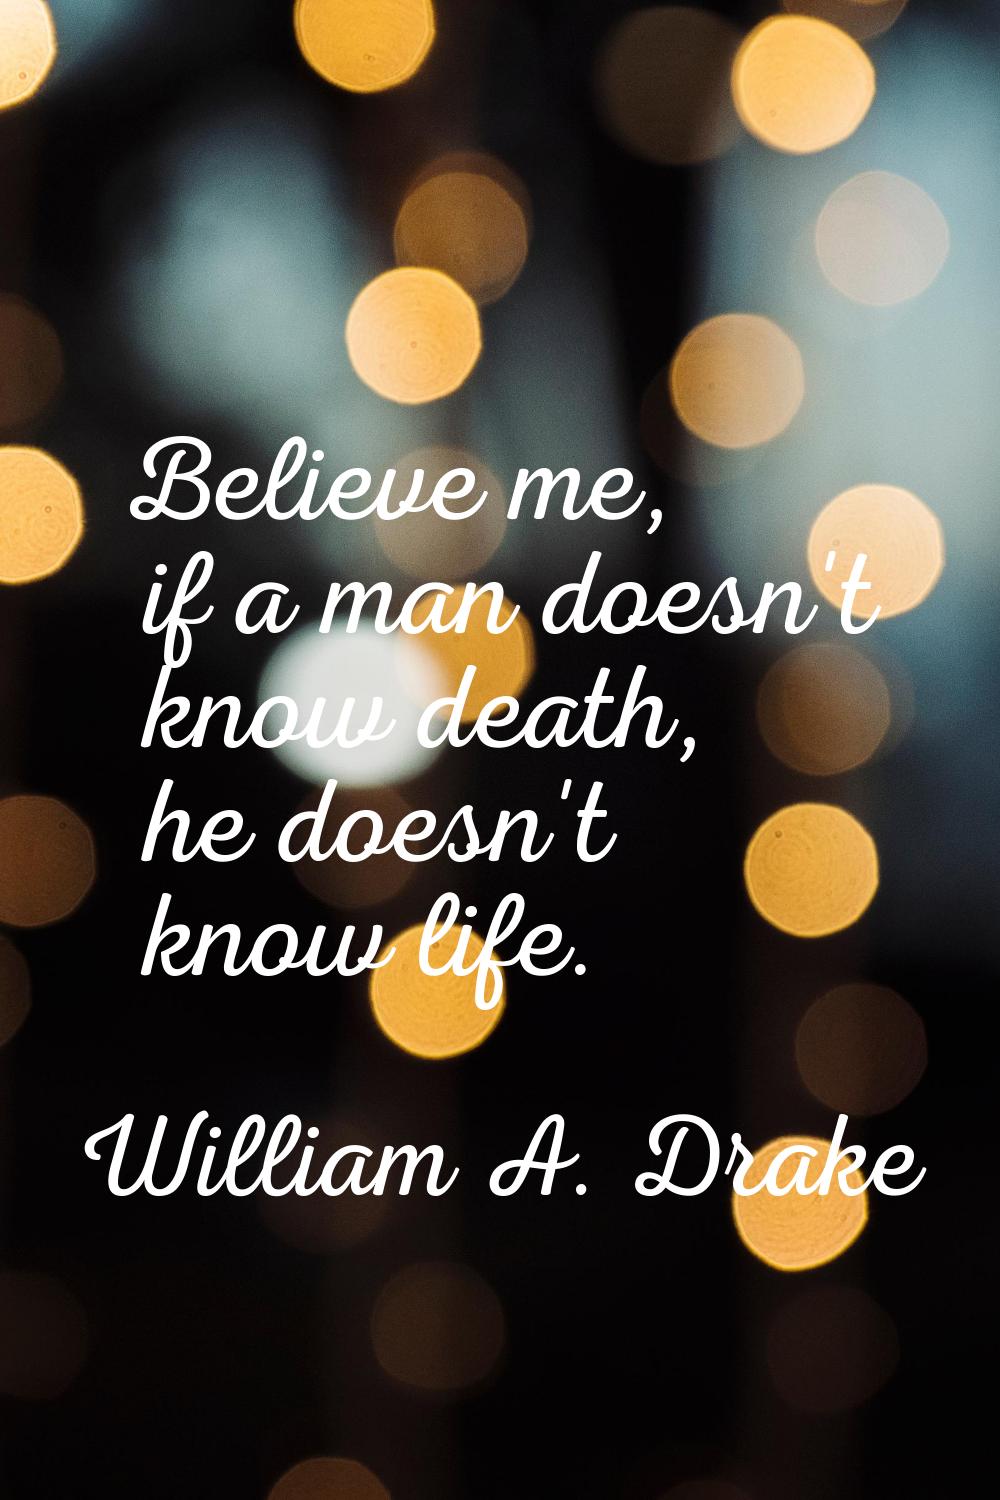 Believe me, if a man doesn't know death, he doesn't know life.